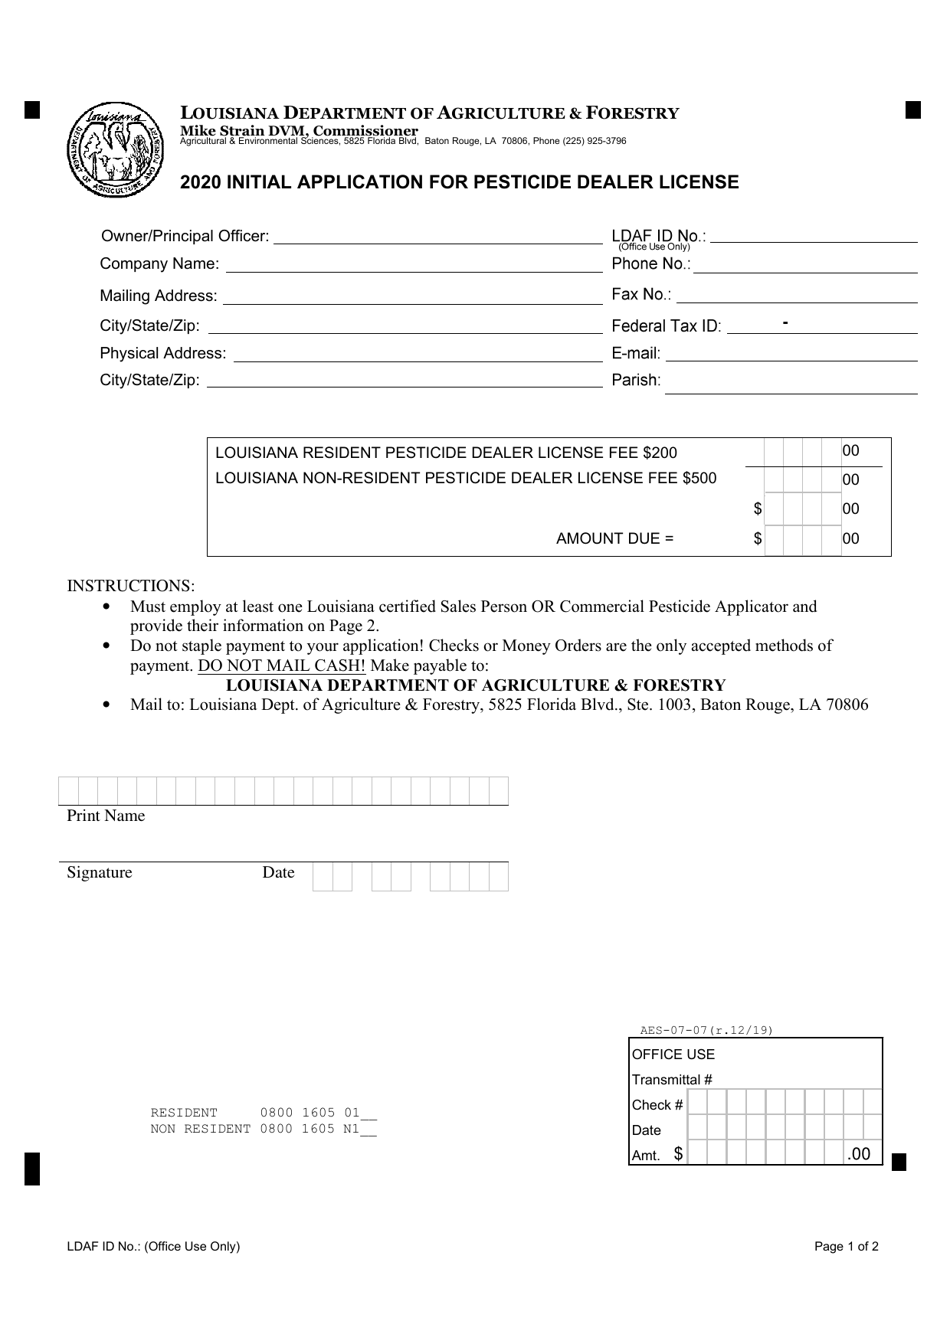 Initial Application for Pesticide Dealer License - Louisiana, Page 1